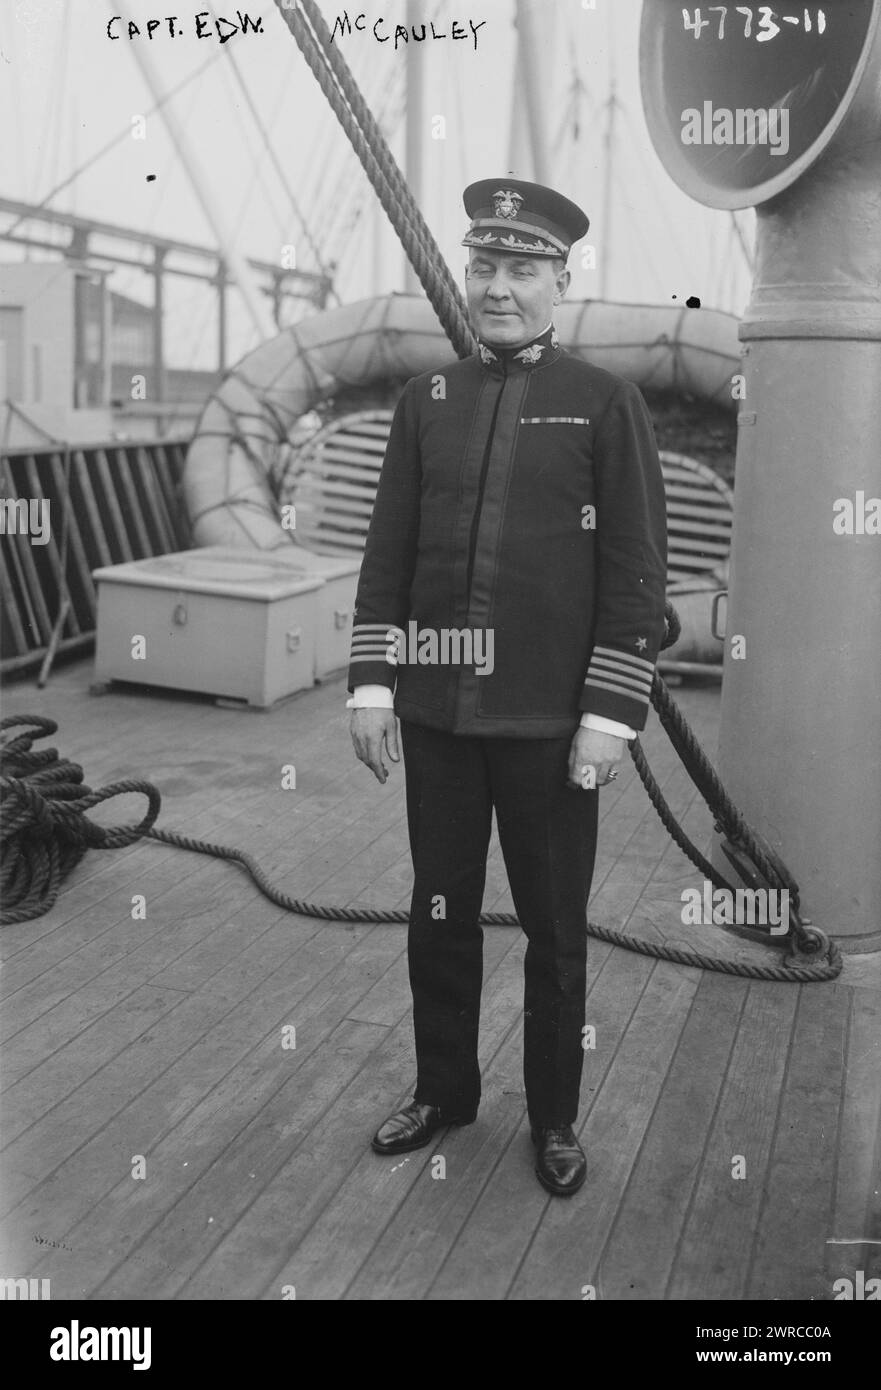 Capt. Edw. McCauley, Photograph shows Captain Edward McCauley who was the captain of the USS George Washington which took President Woodrow Wilson to Paris after the armistice of World War I., 1918, Glass negatives, 1 negative: glass Stock Photo